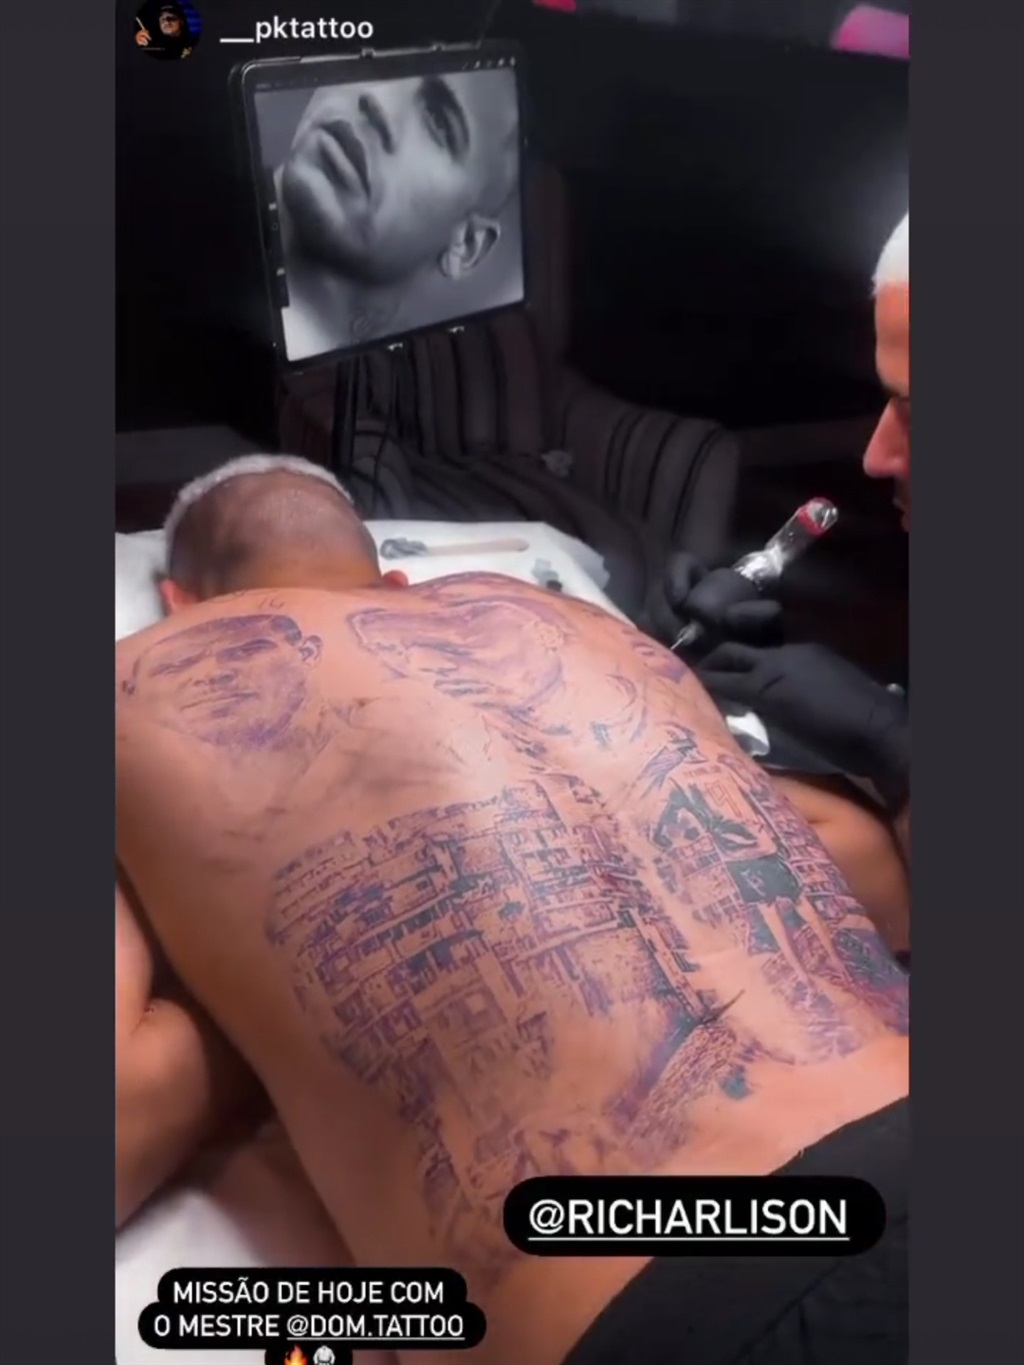 Richarlison gets tattoo of Brazil greats Ronaldo Neymar and HIMSELF along  with Pele message as Tottenham striker immortalises World Cup campaign that  ended in tears  talkSPORT